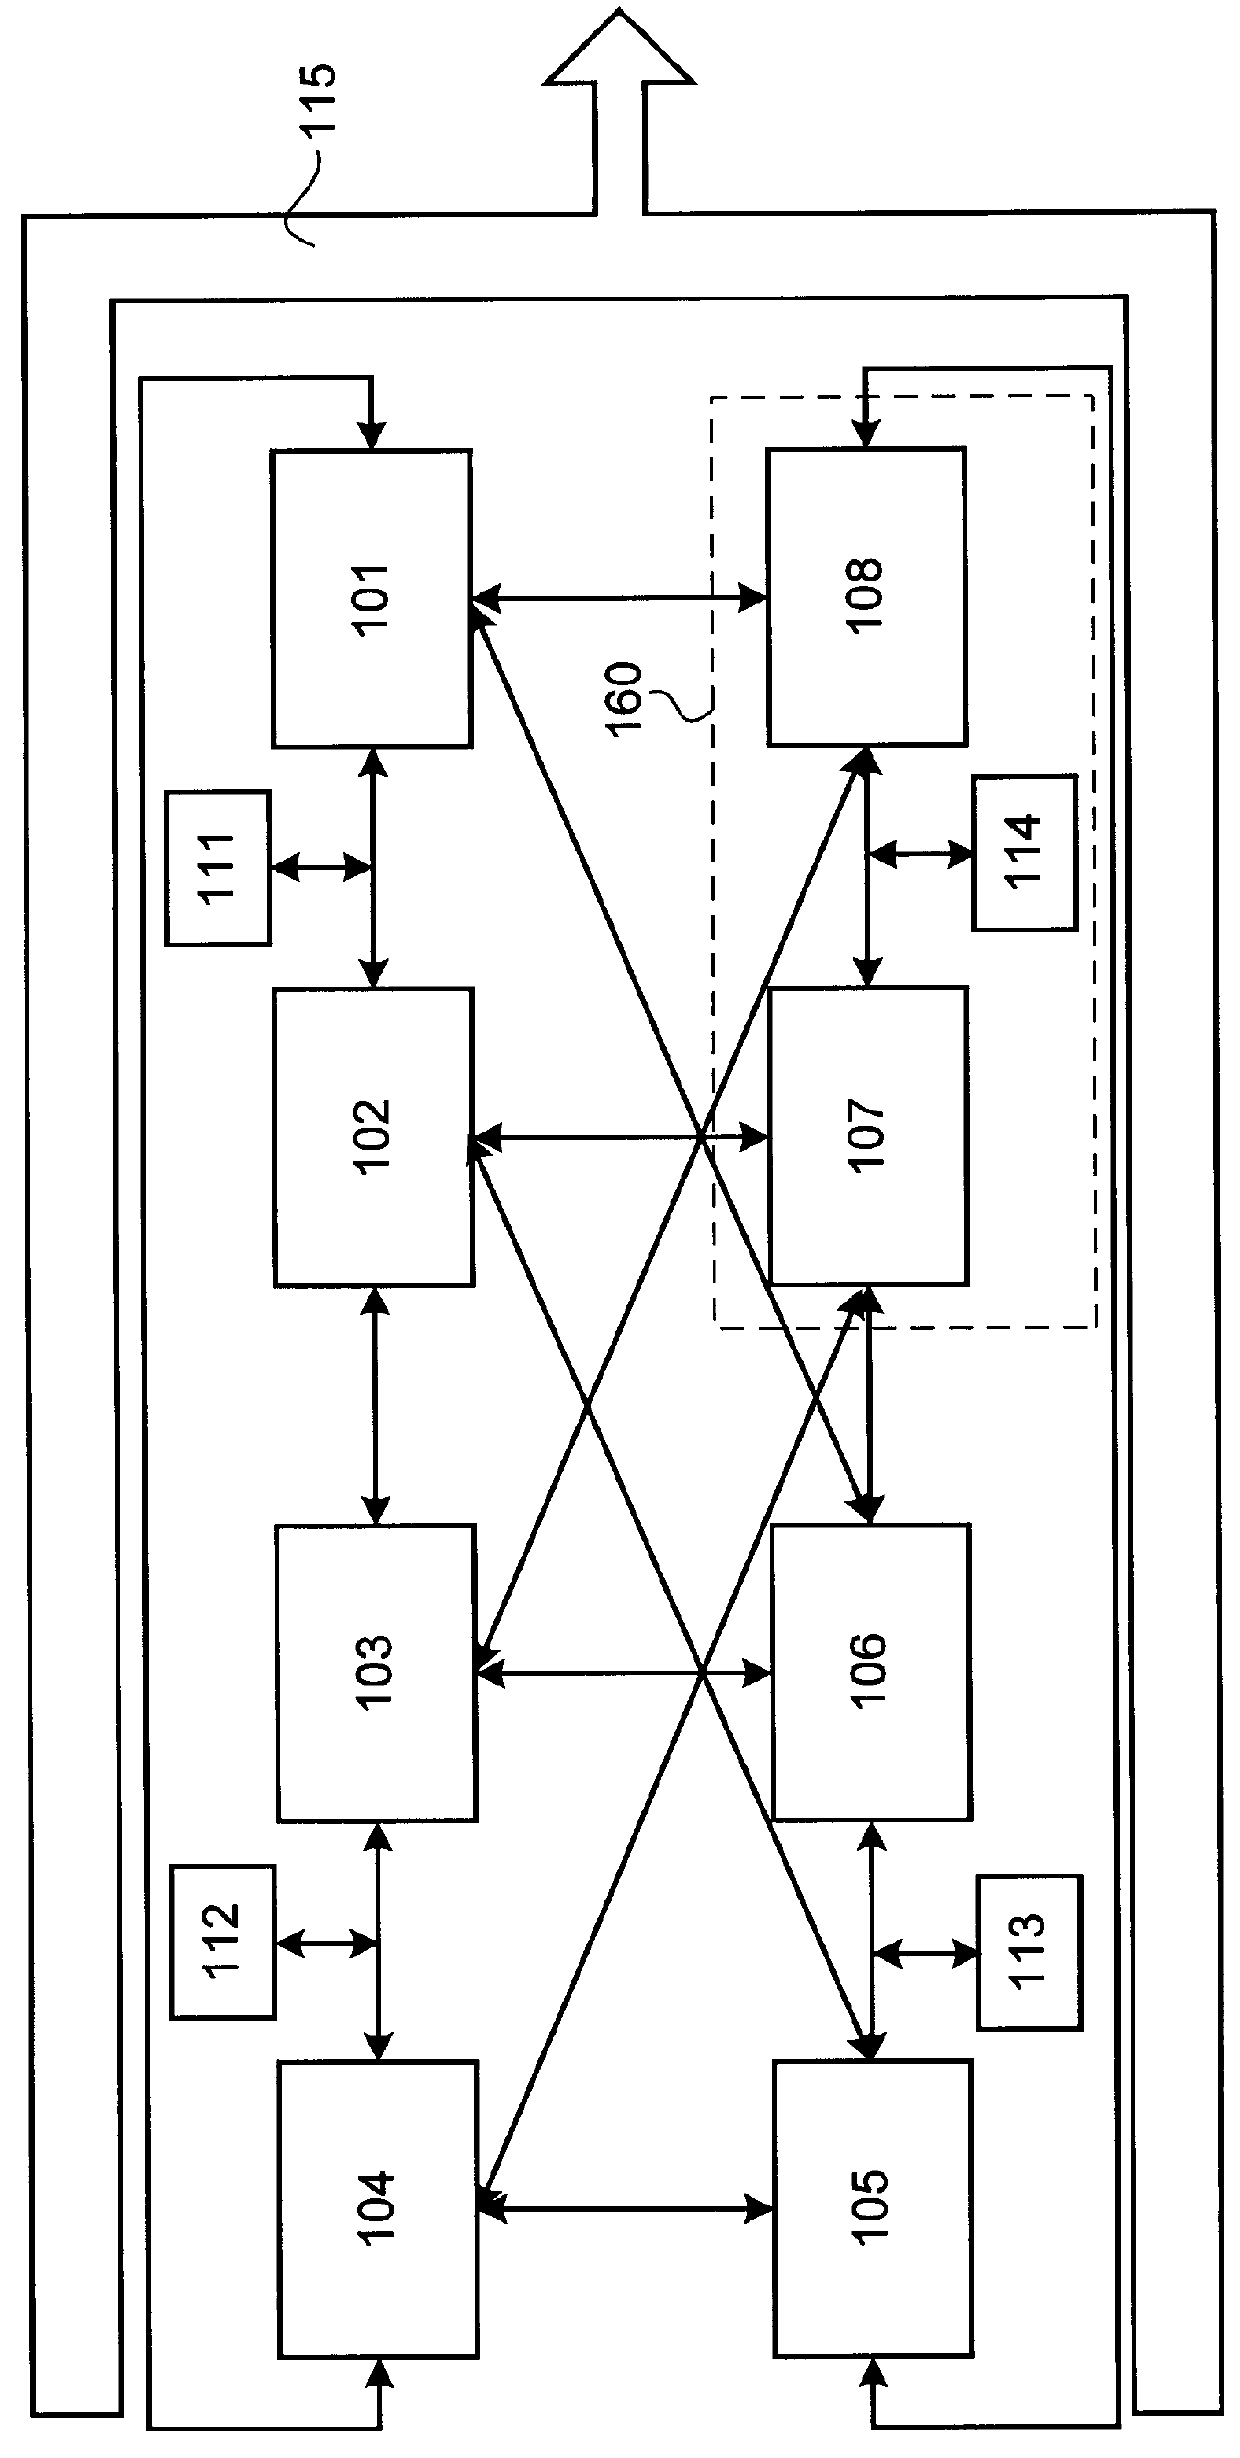 Reconfigurable computer architecture using programmable logic devices